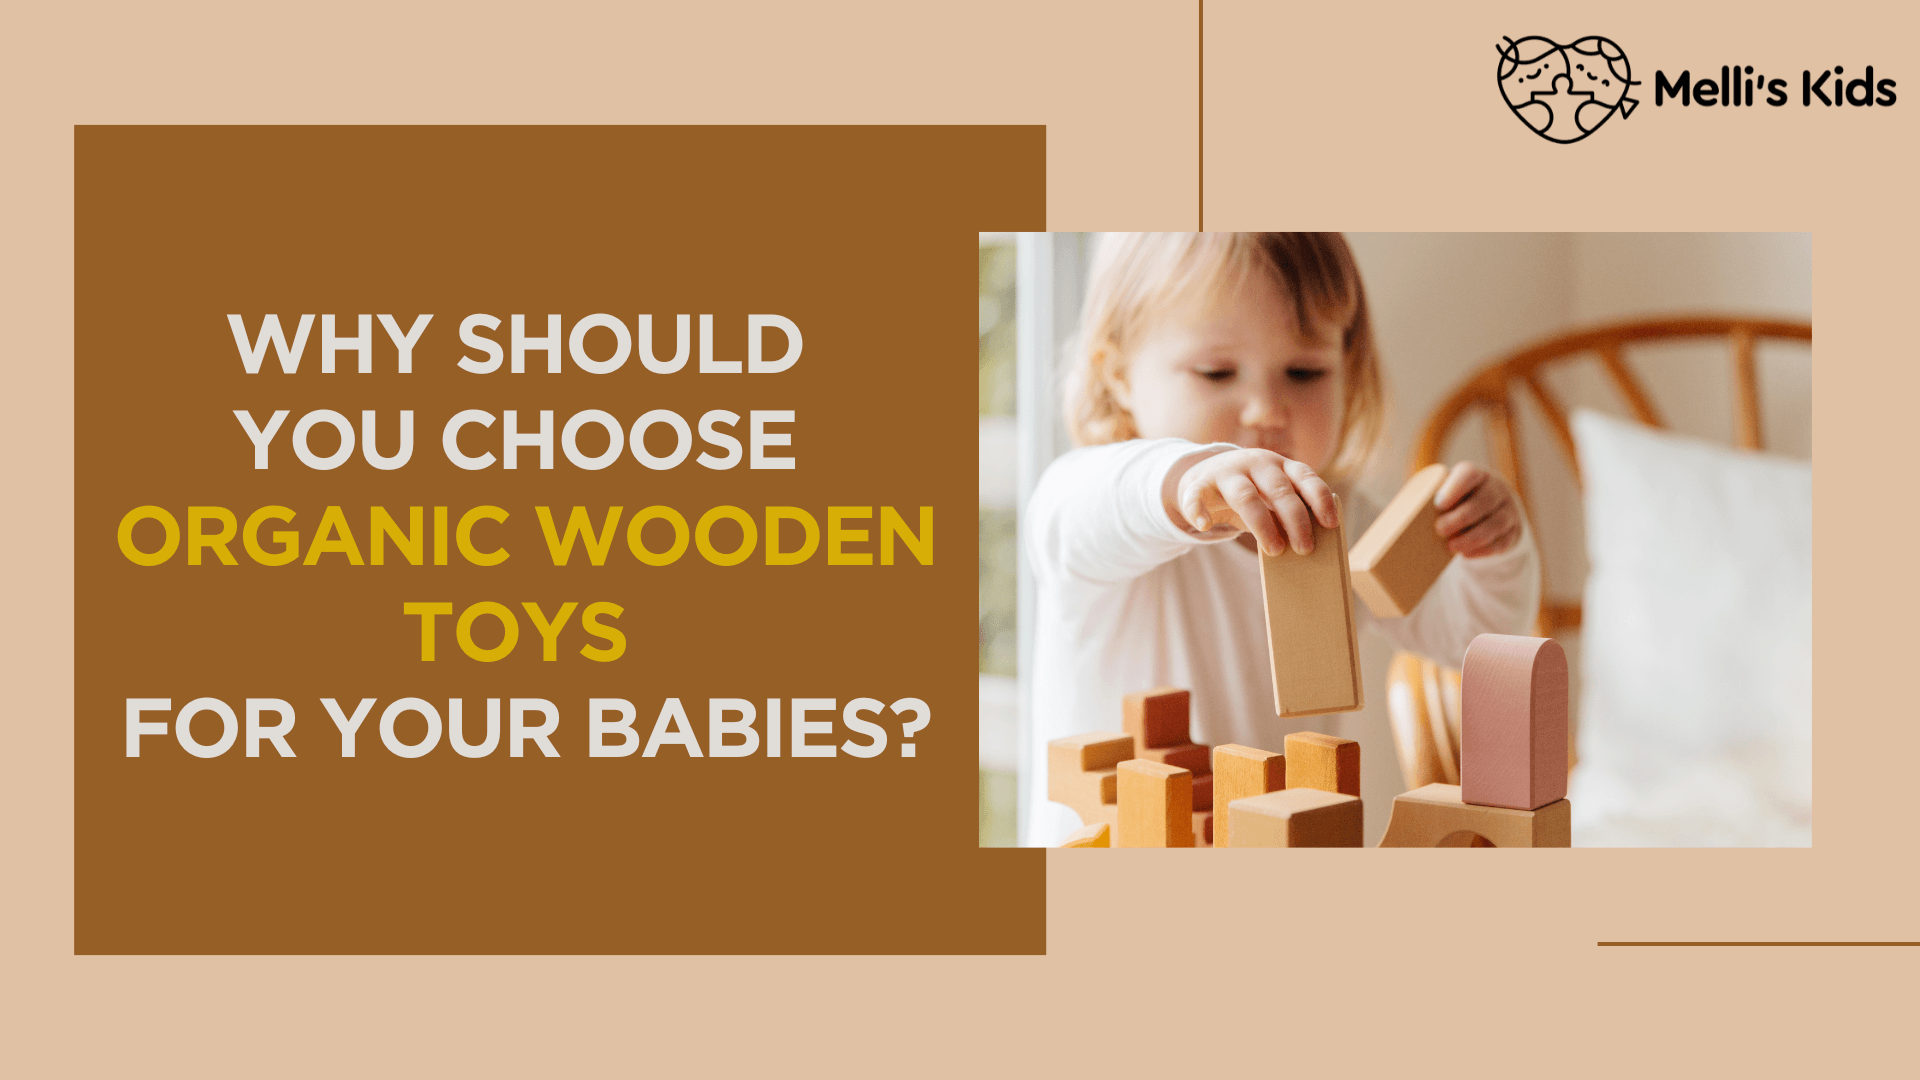 Why should you choose organic wooden toys for your babies? - Melli's Kids